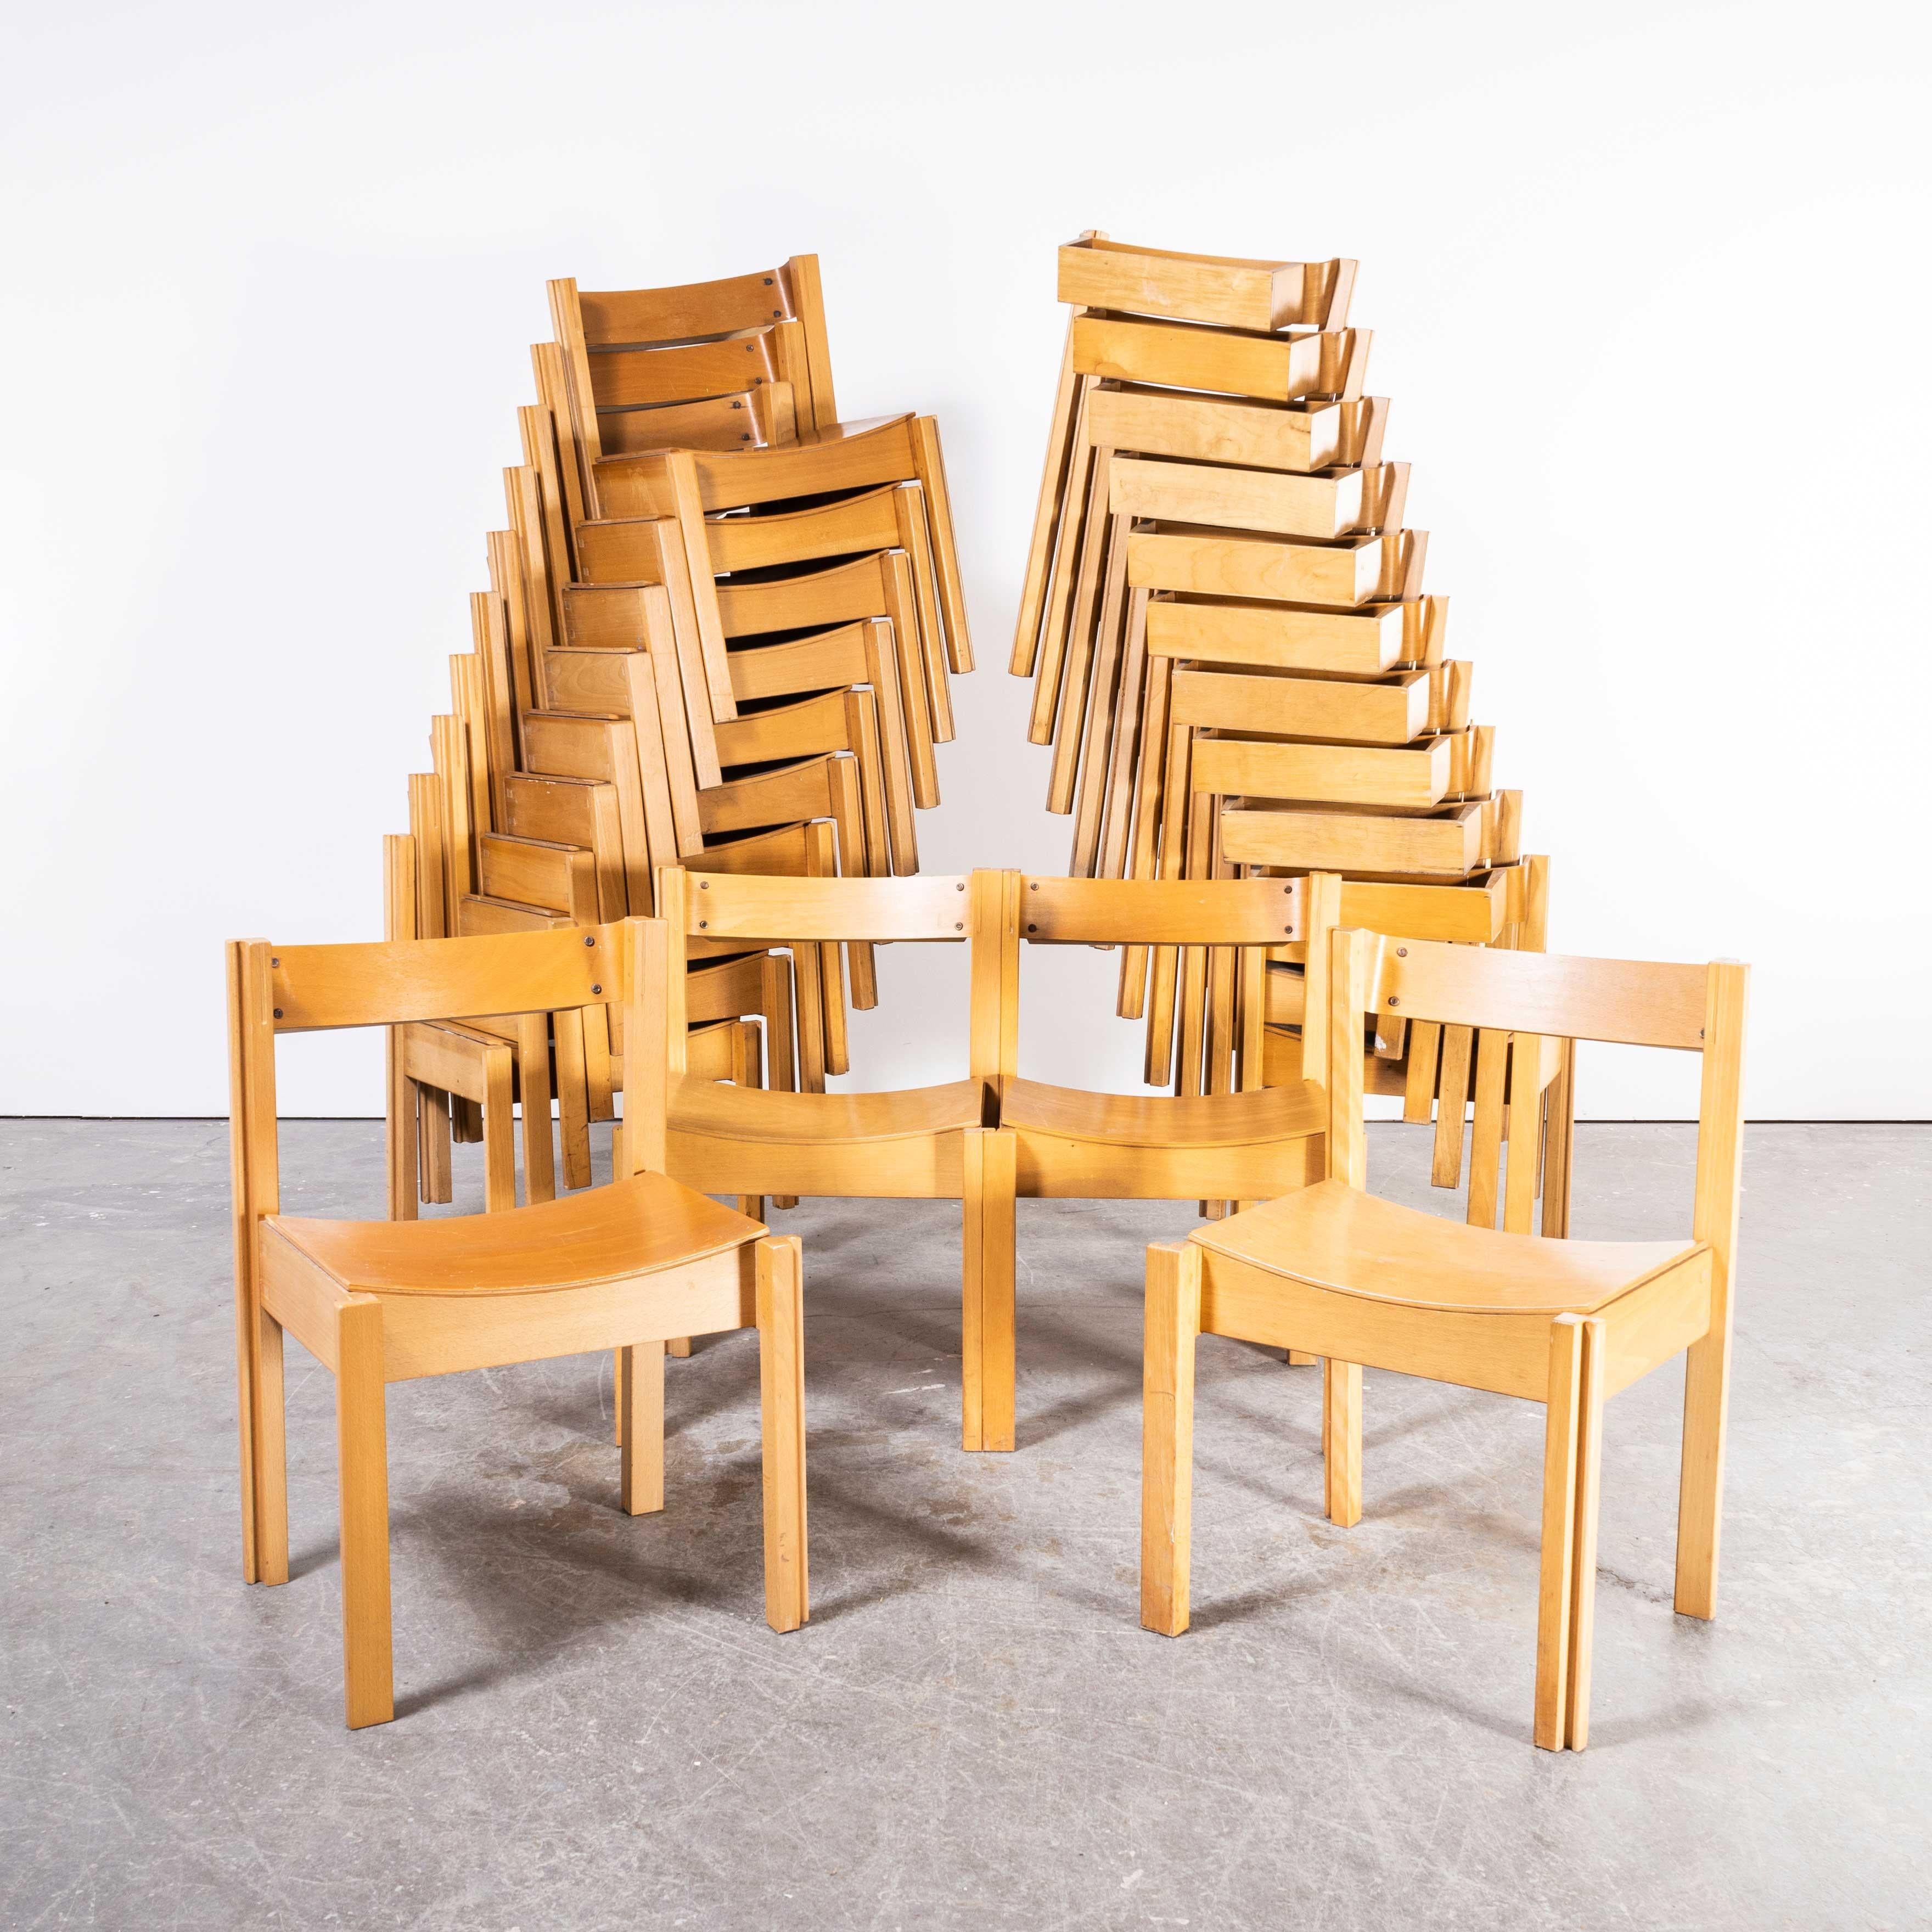 English 1960’s Linking And Stacking Chairs By Clive Bacon – Last Few Remaining For Sale